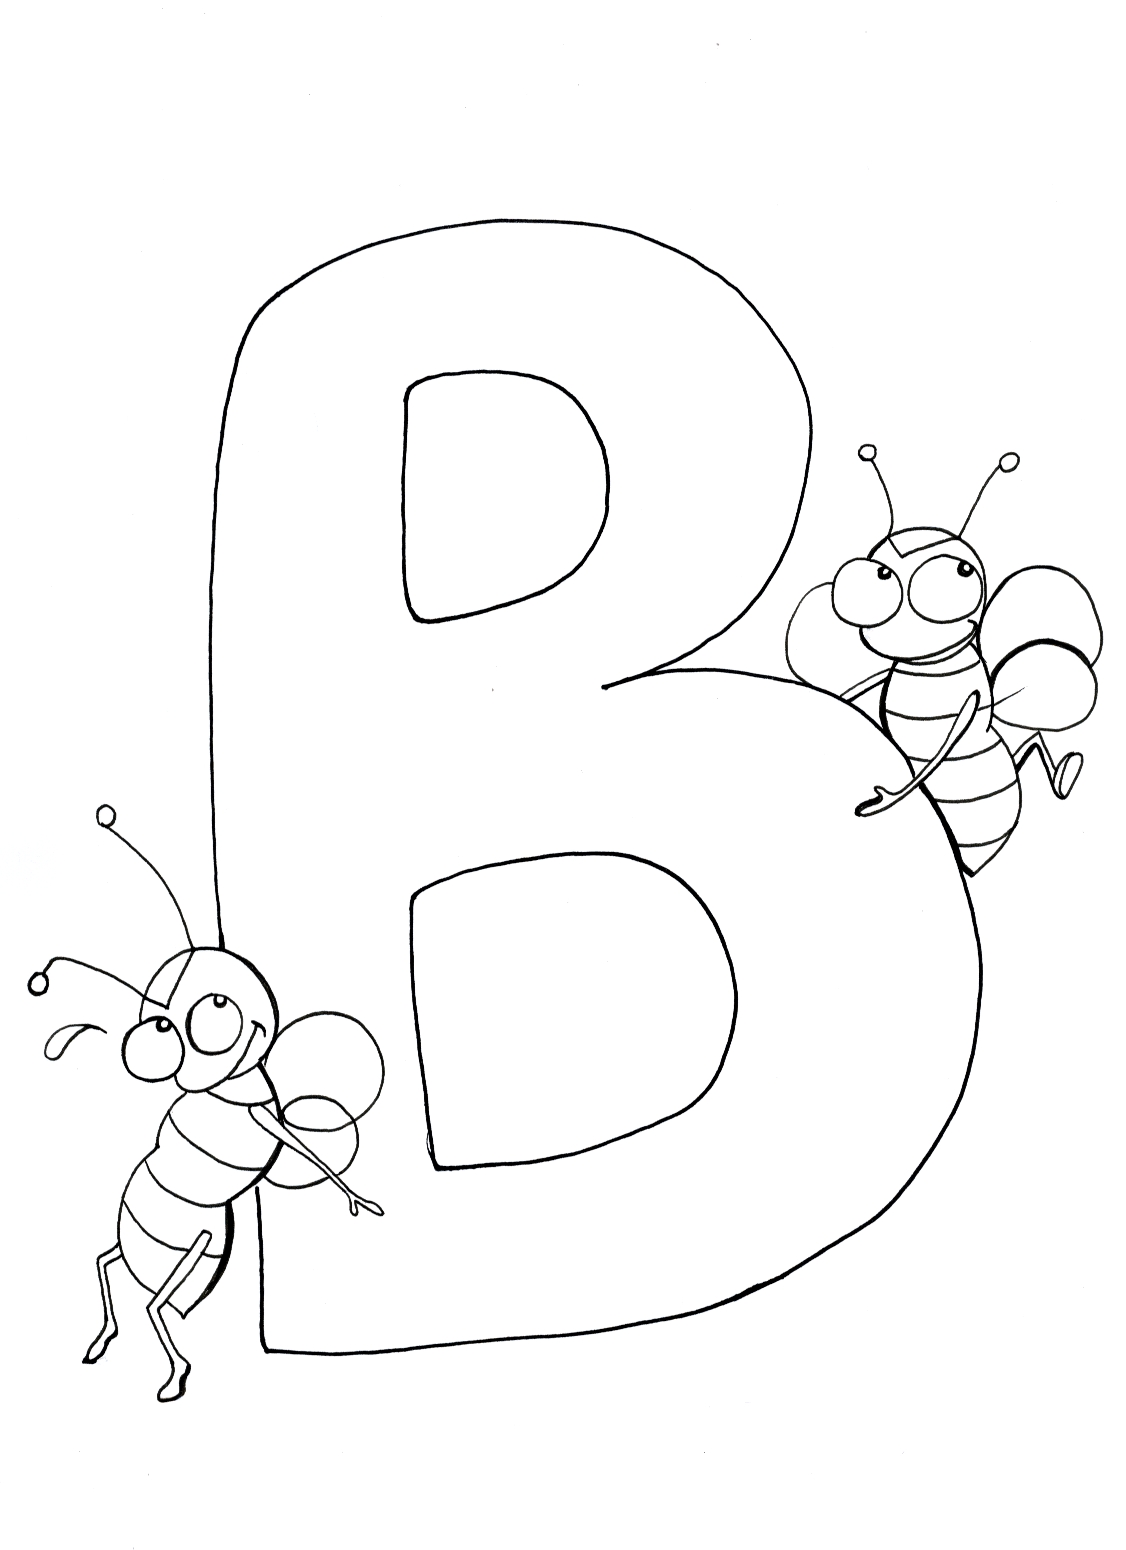 Letter B Coloring Pages at GetColorings.com | Free printable colorings ...